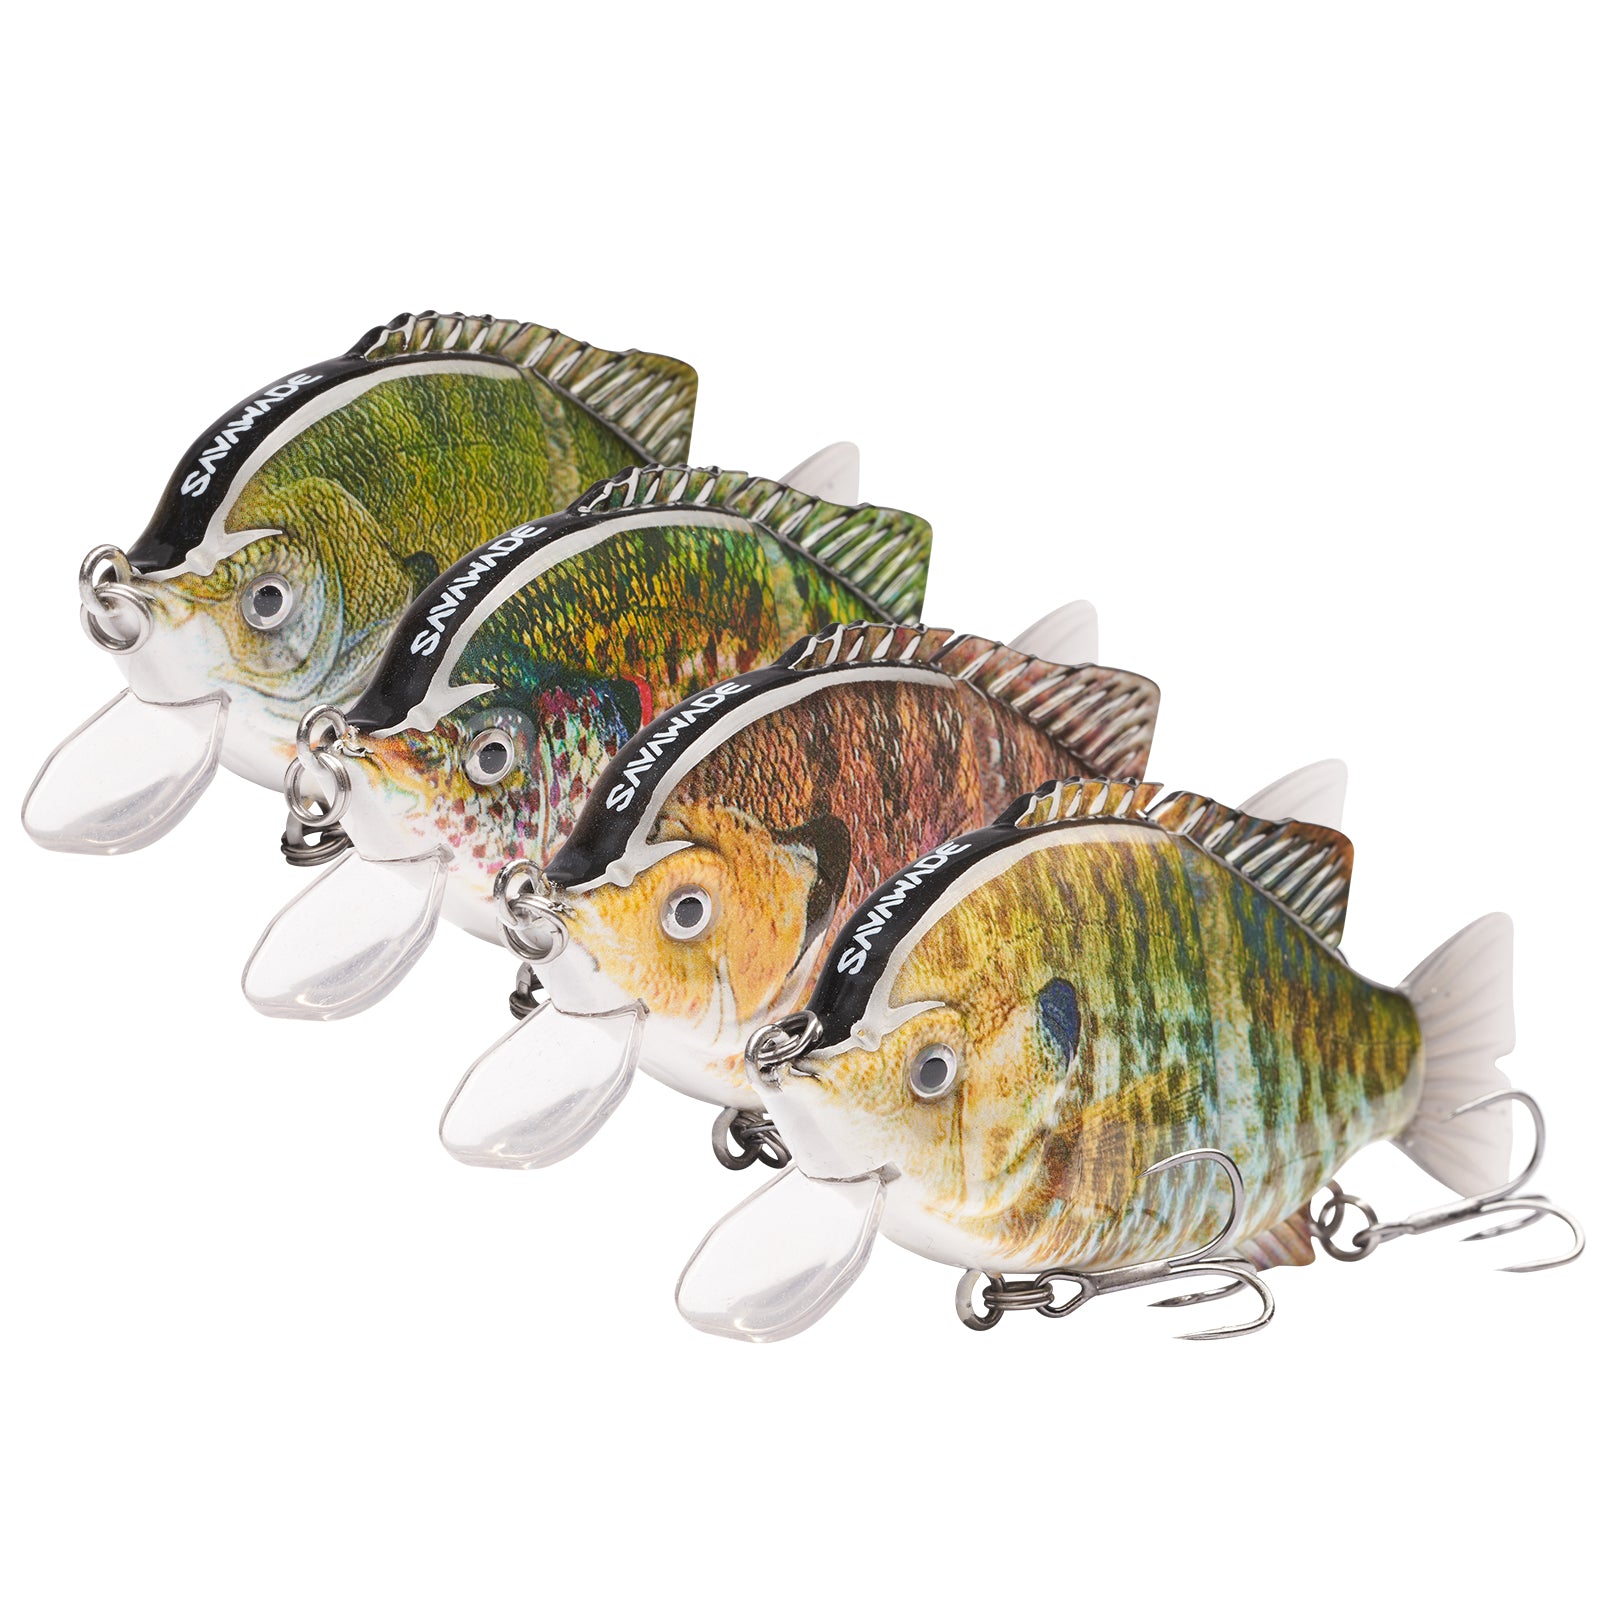  Bassdash SwimShad Glide Baits Jointed Swimbait Bass Pike Salmon  Trout Muskie Fishing Lure,3-Pack : Sports & Outdoors